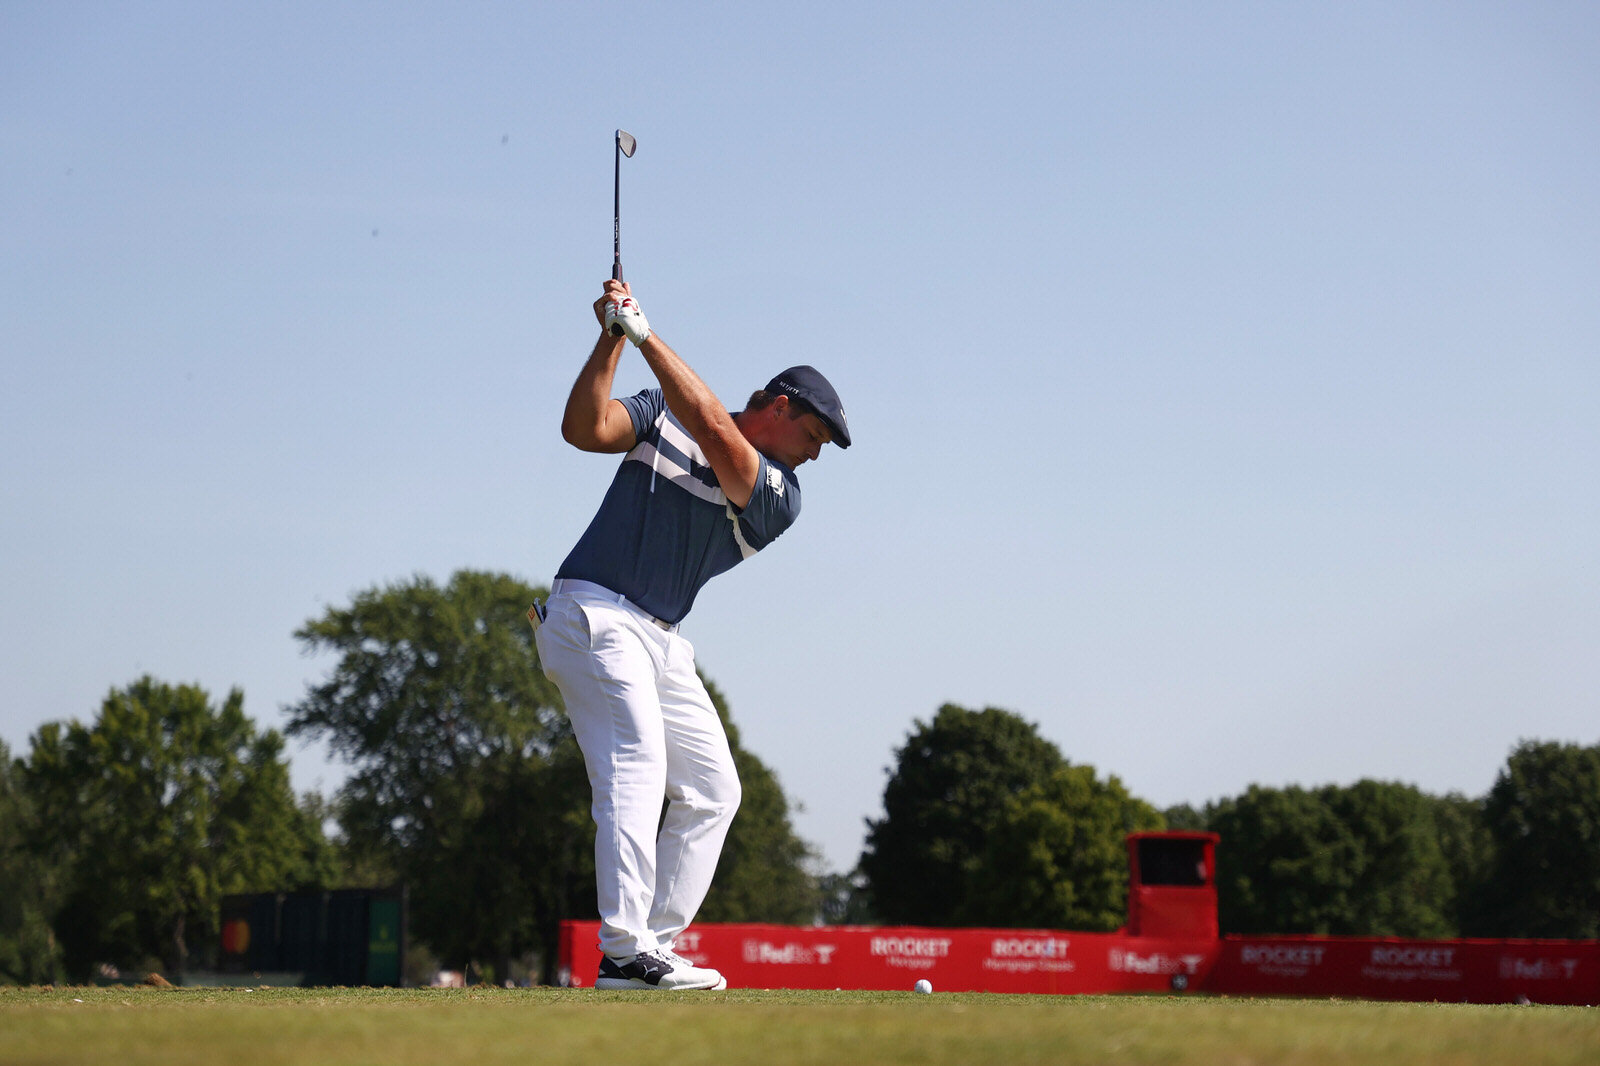  DETROIT, MICHIGAN - JULY 05: Bryson DeChambeau of the United States plays his shot from the 15th tee during the final round of the Rocket Mortgage Classic on July 05, 2020 at the Detroit Golf Club in Detroit, Michigan. (Photo by Gregory Shamus/Getty